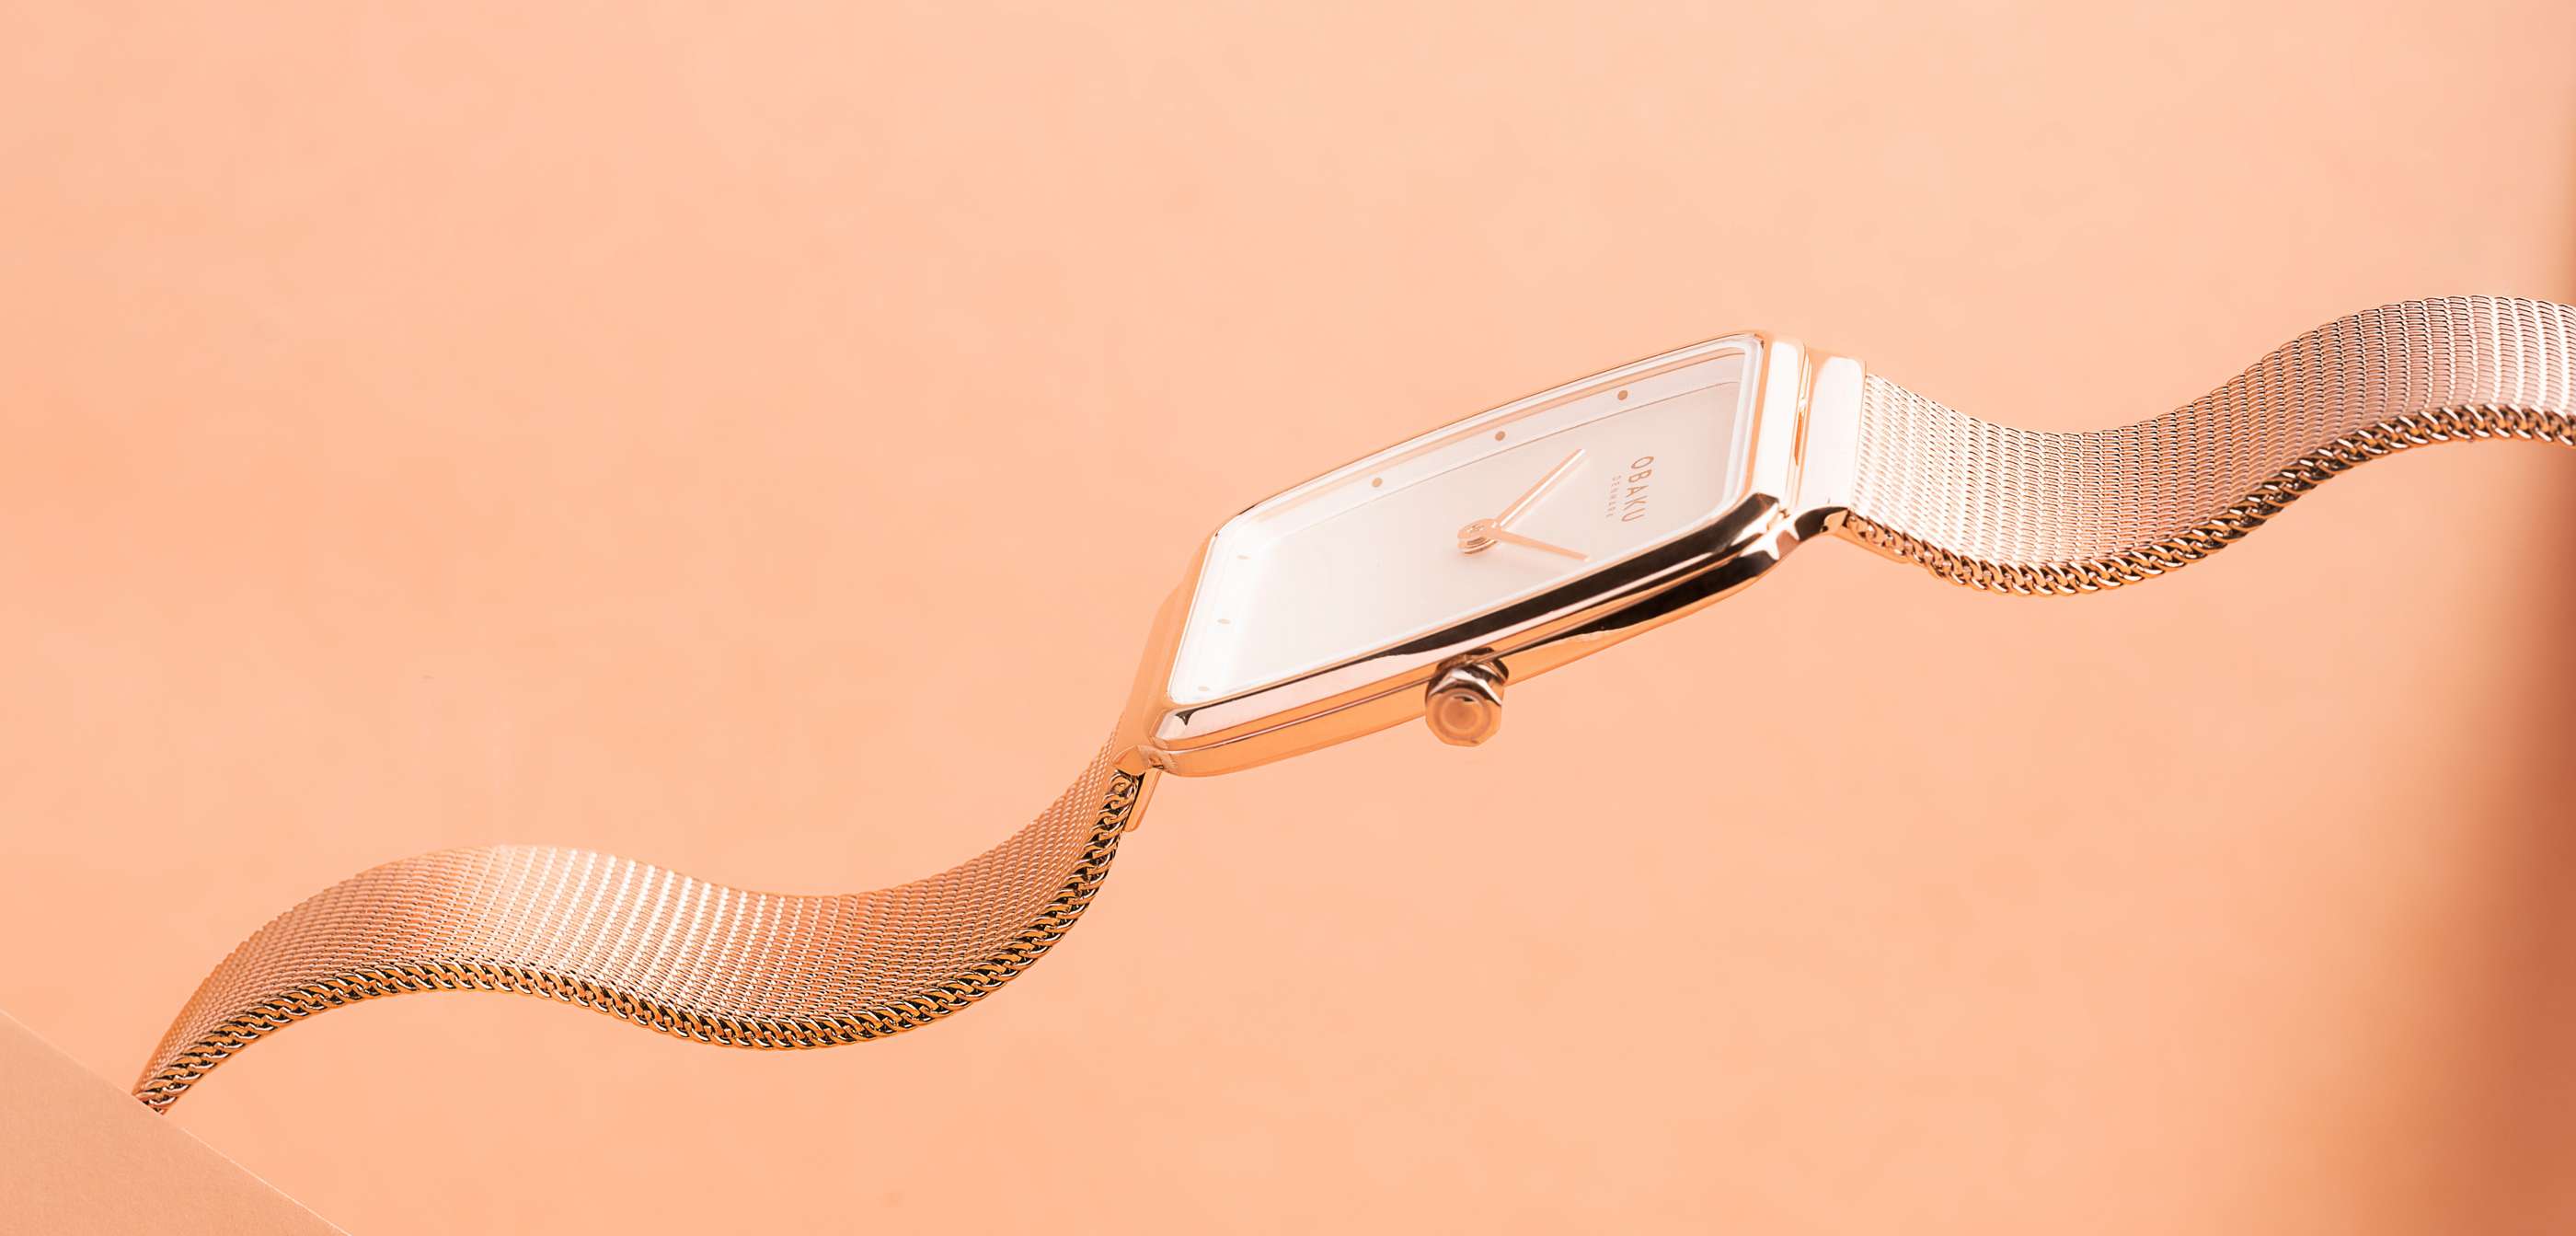 Ultra-slim rose gold watch against a salmon background